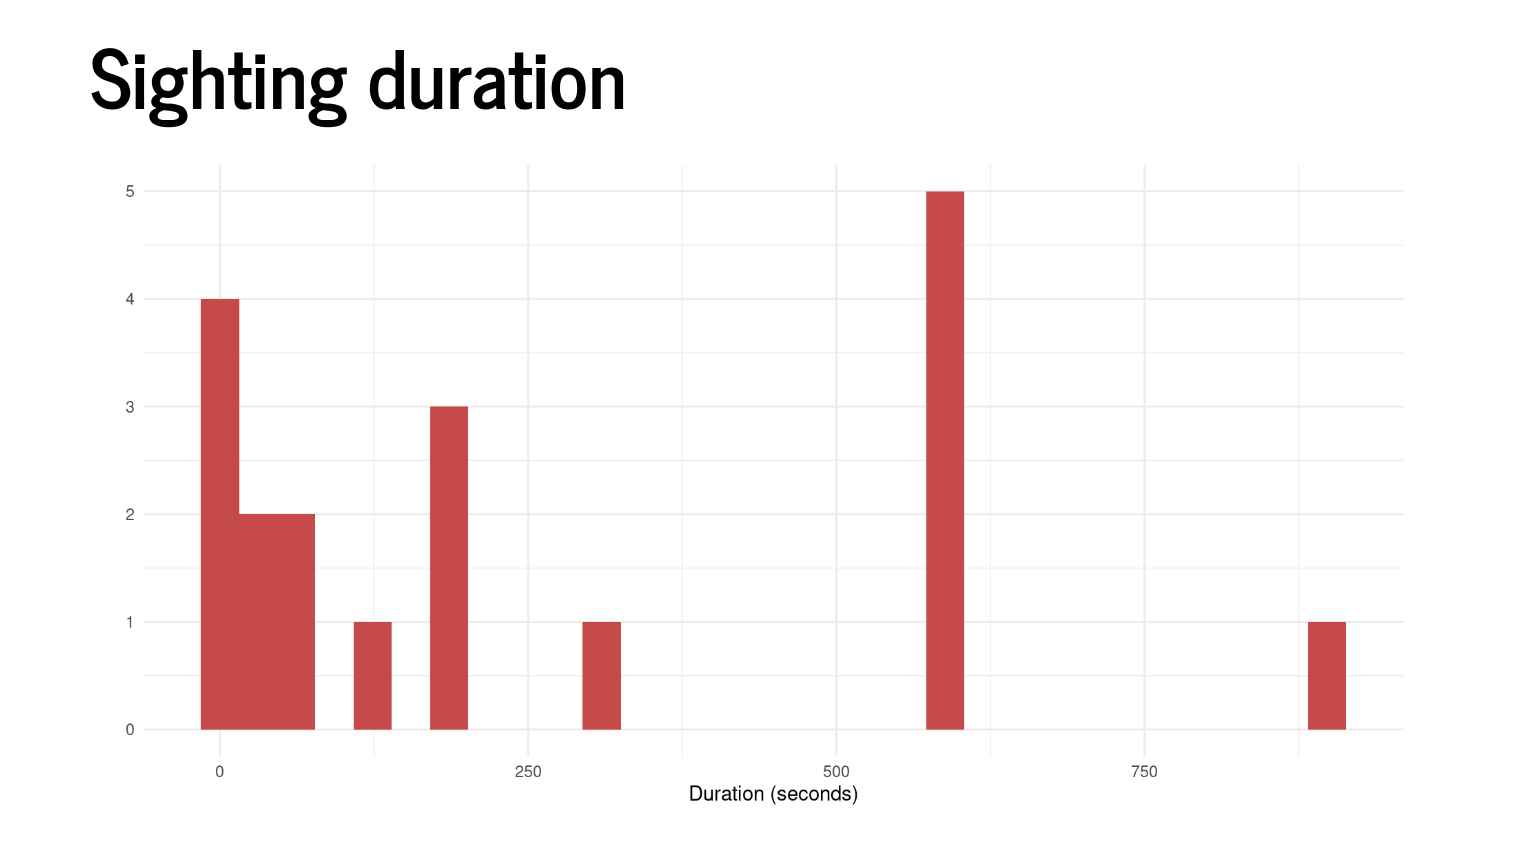 Bar chart of duration of sightings in seconds.